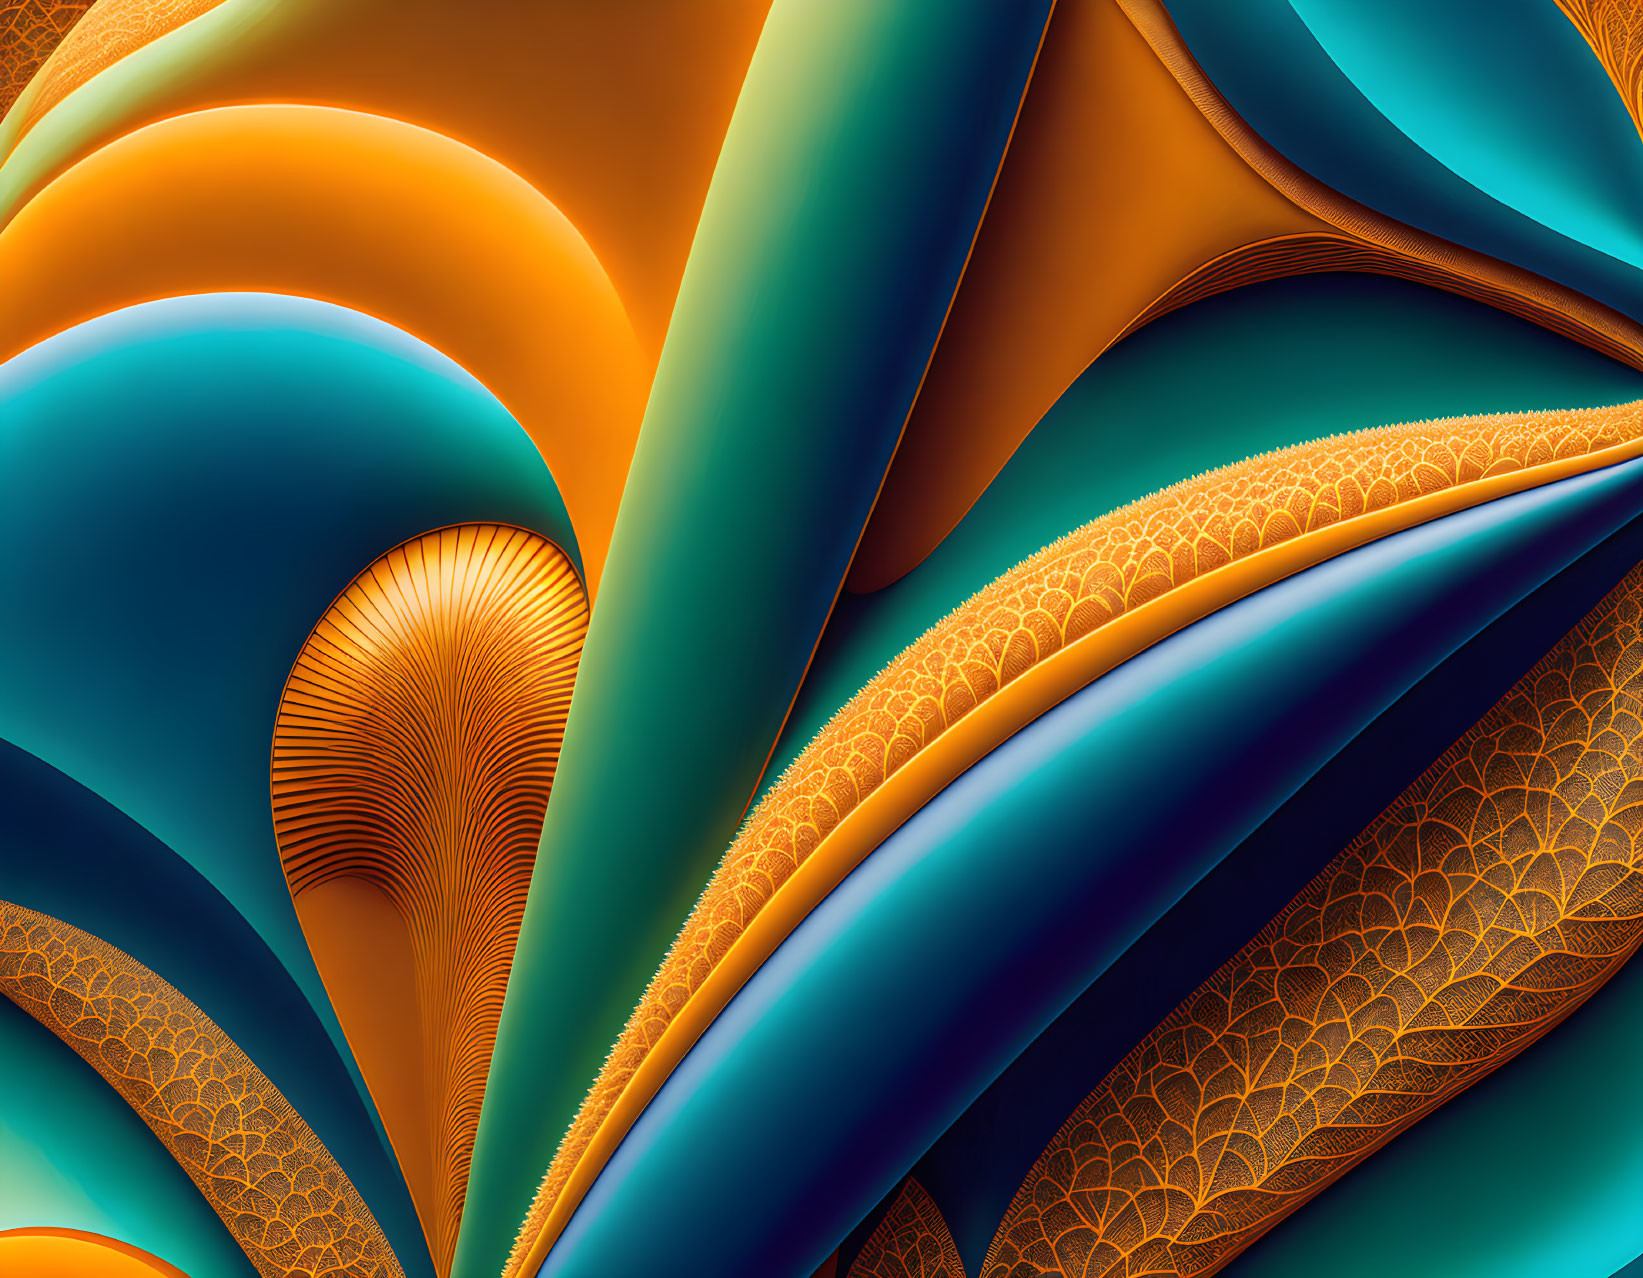 Colorful Abstract Art: Fluid Shapes in Orange, Teal, and Blue